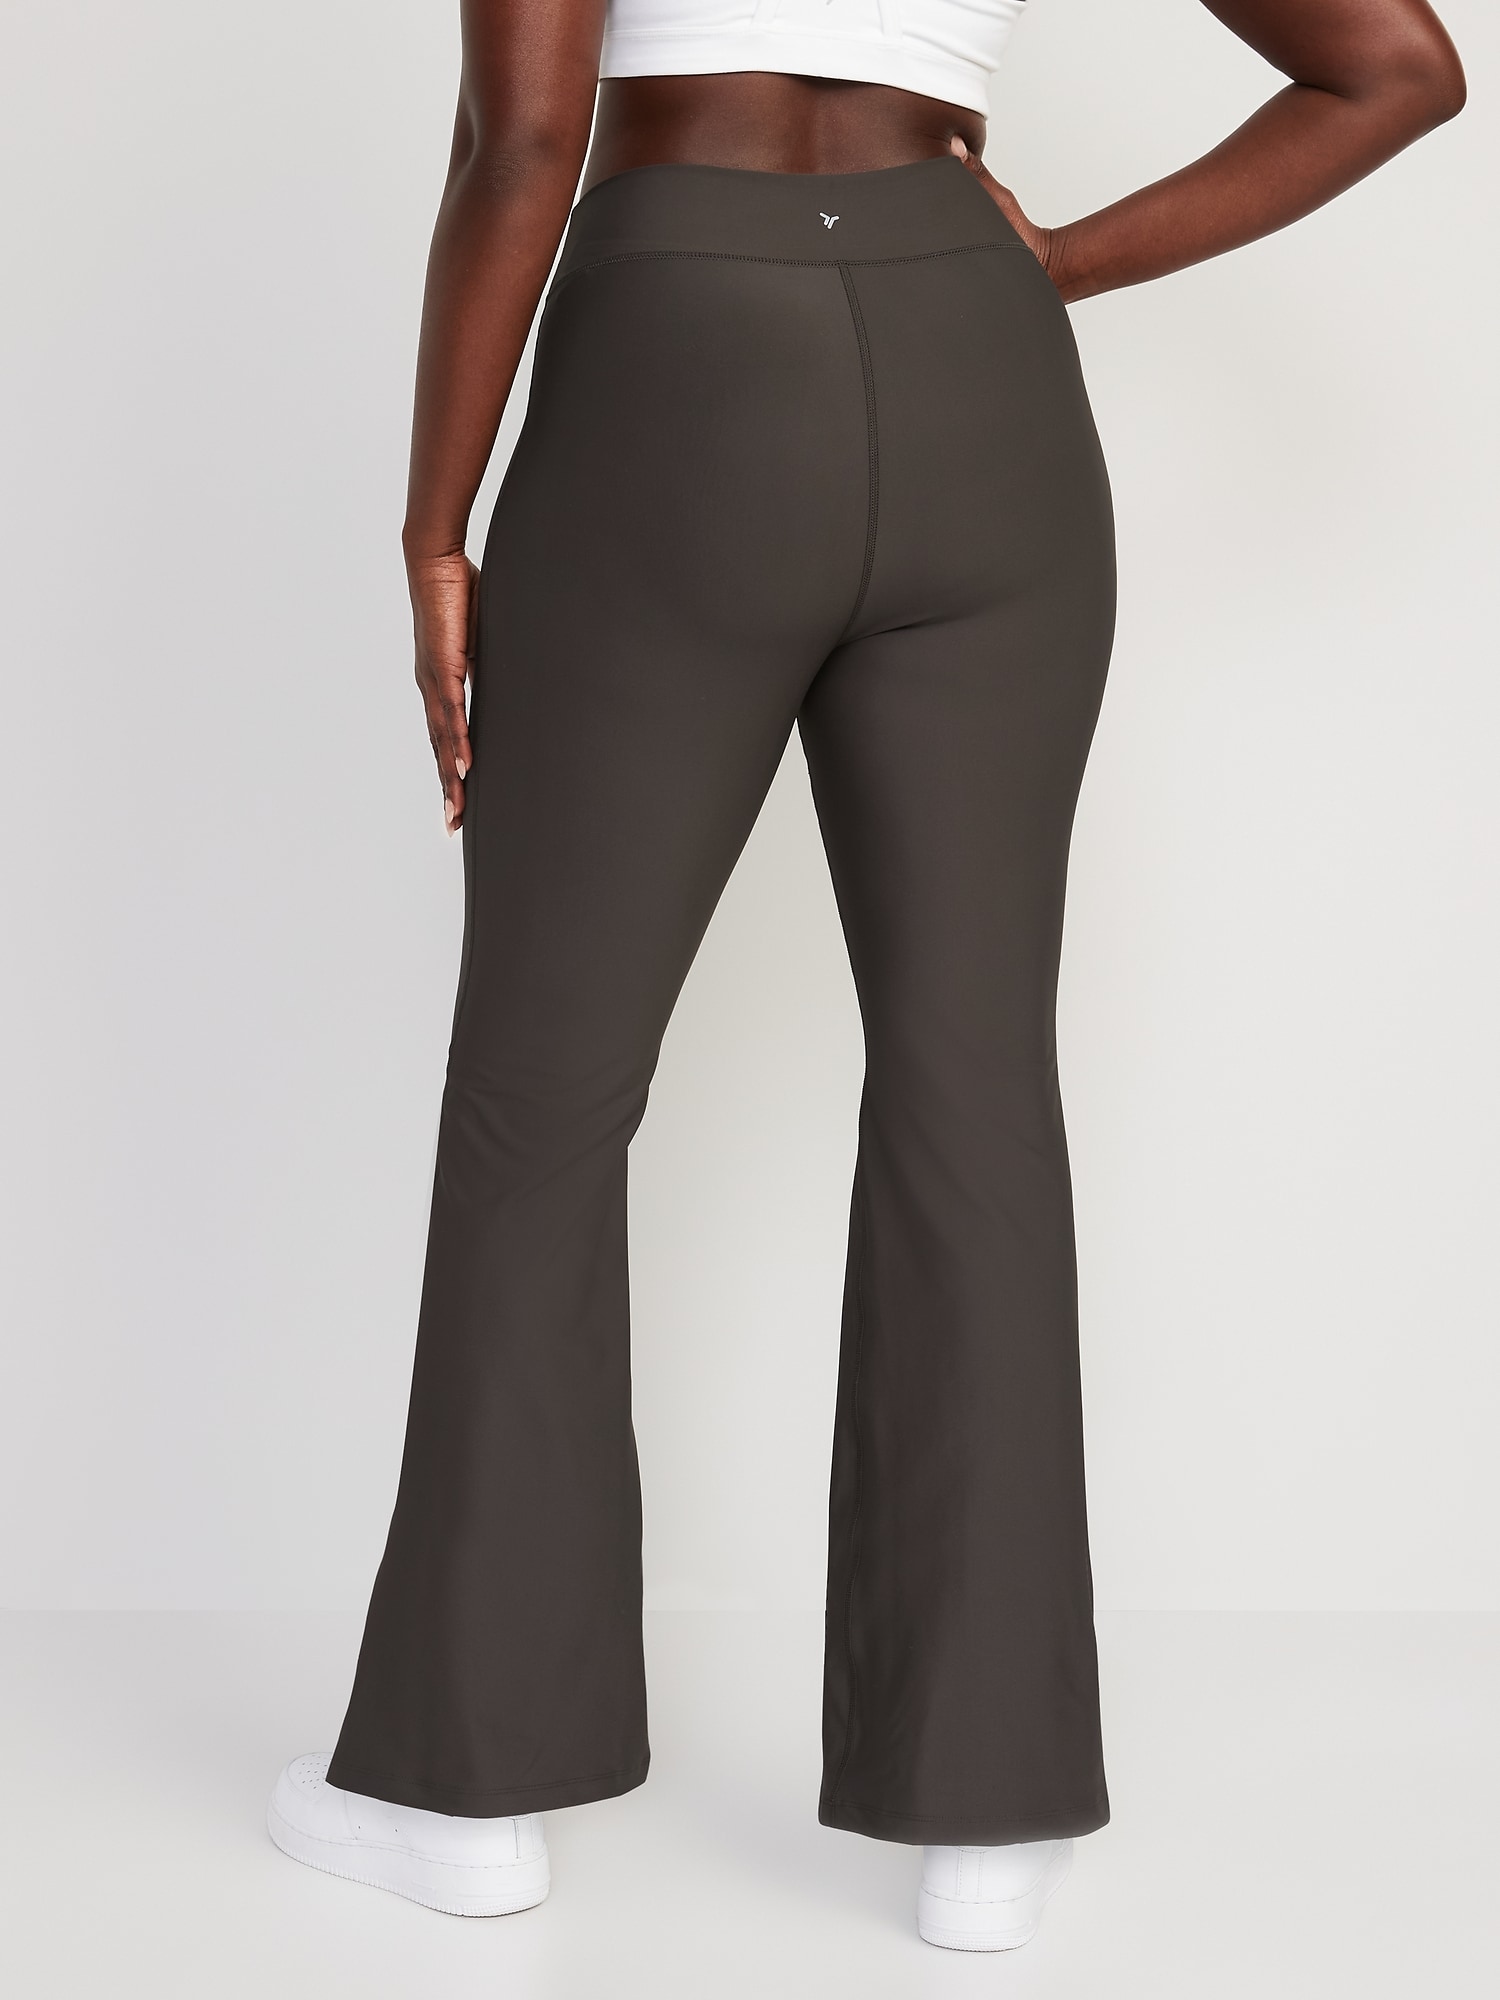 Old Navy Powersoft Flare Leggings 2023, Buy Old Navy Online